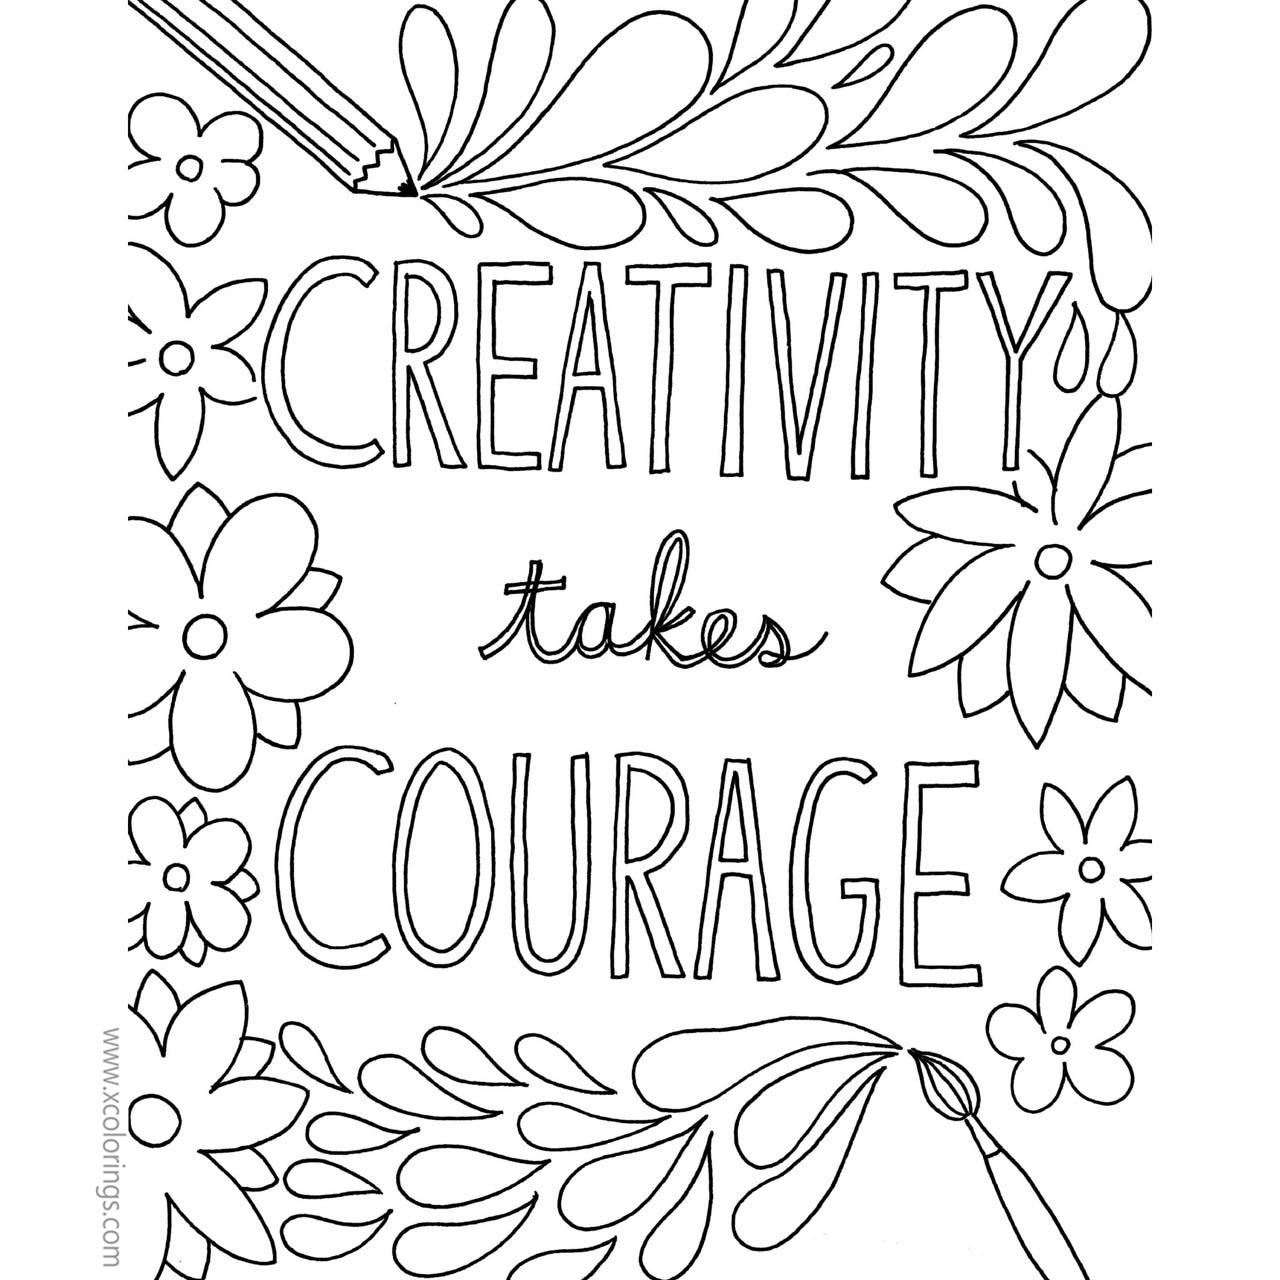 Free Dr Seuss Quotes Coloring Pages Creativity Takes Courage printable